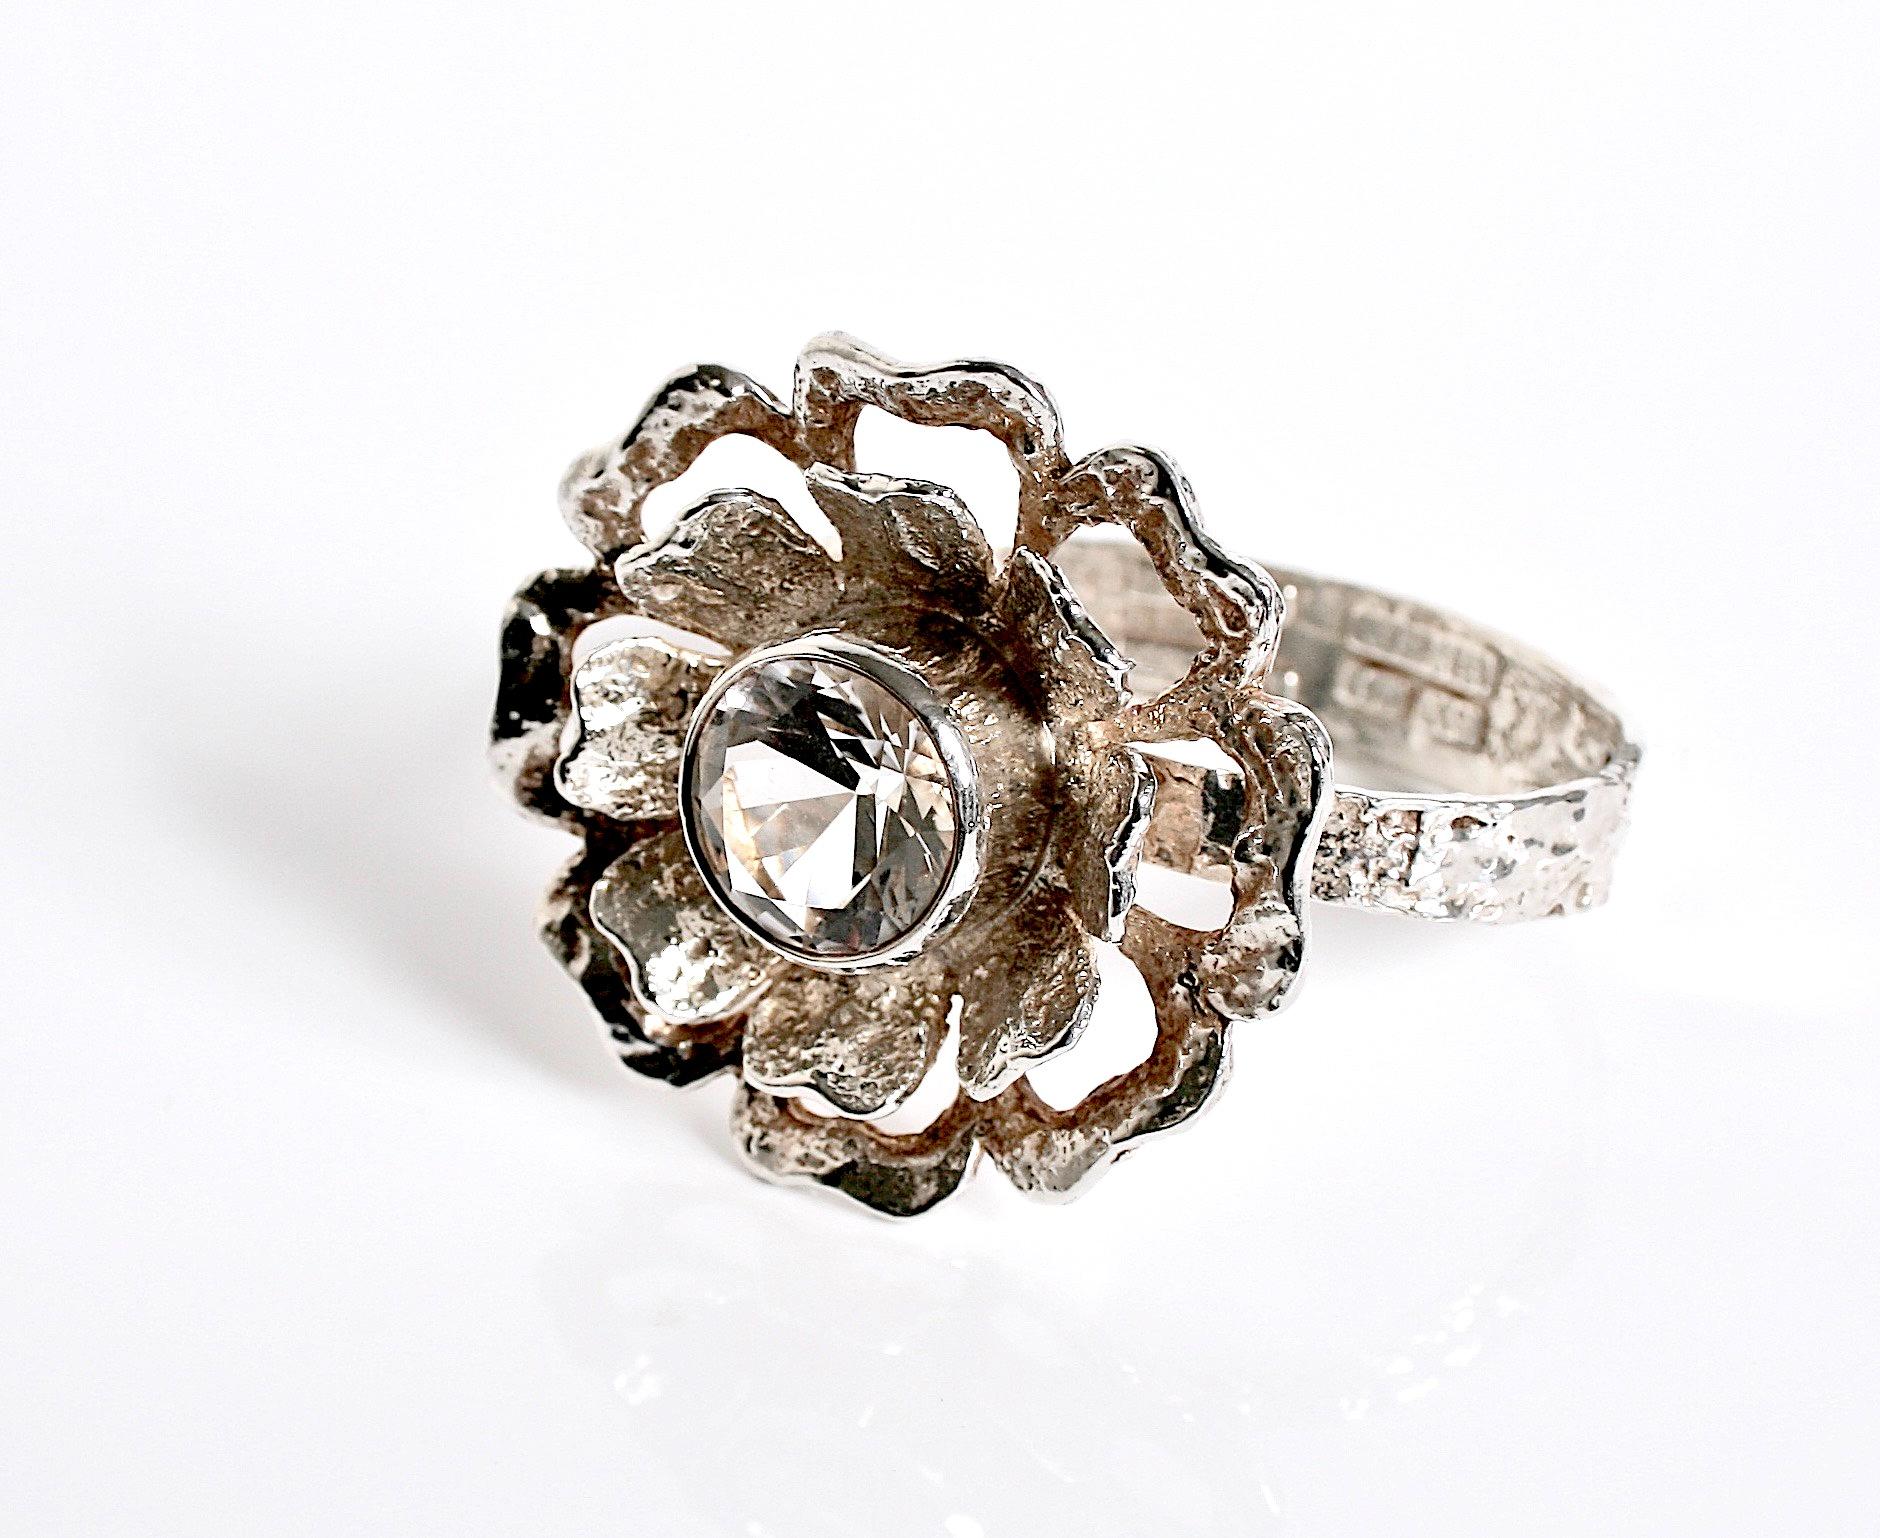 Theresia Hvorslev silver & rock crystal armring designed By Theresia for Mema Sweden date mark X9
Textured cuff cast flower